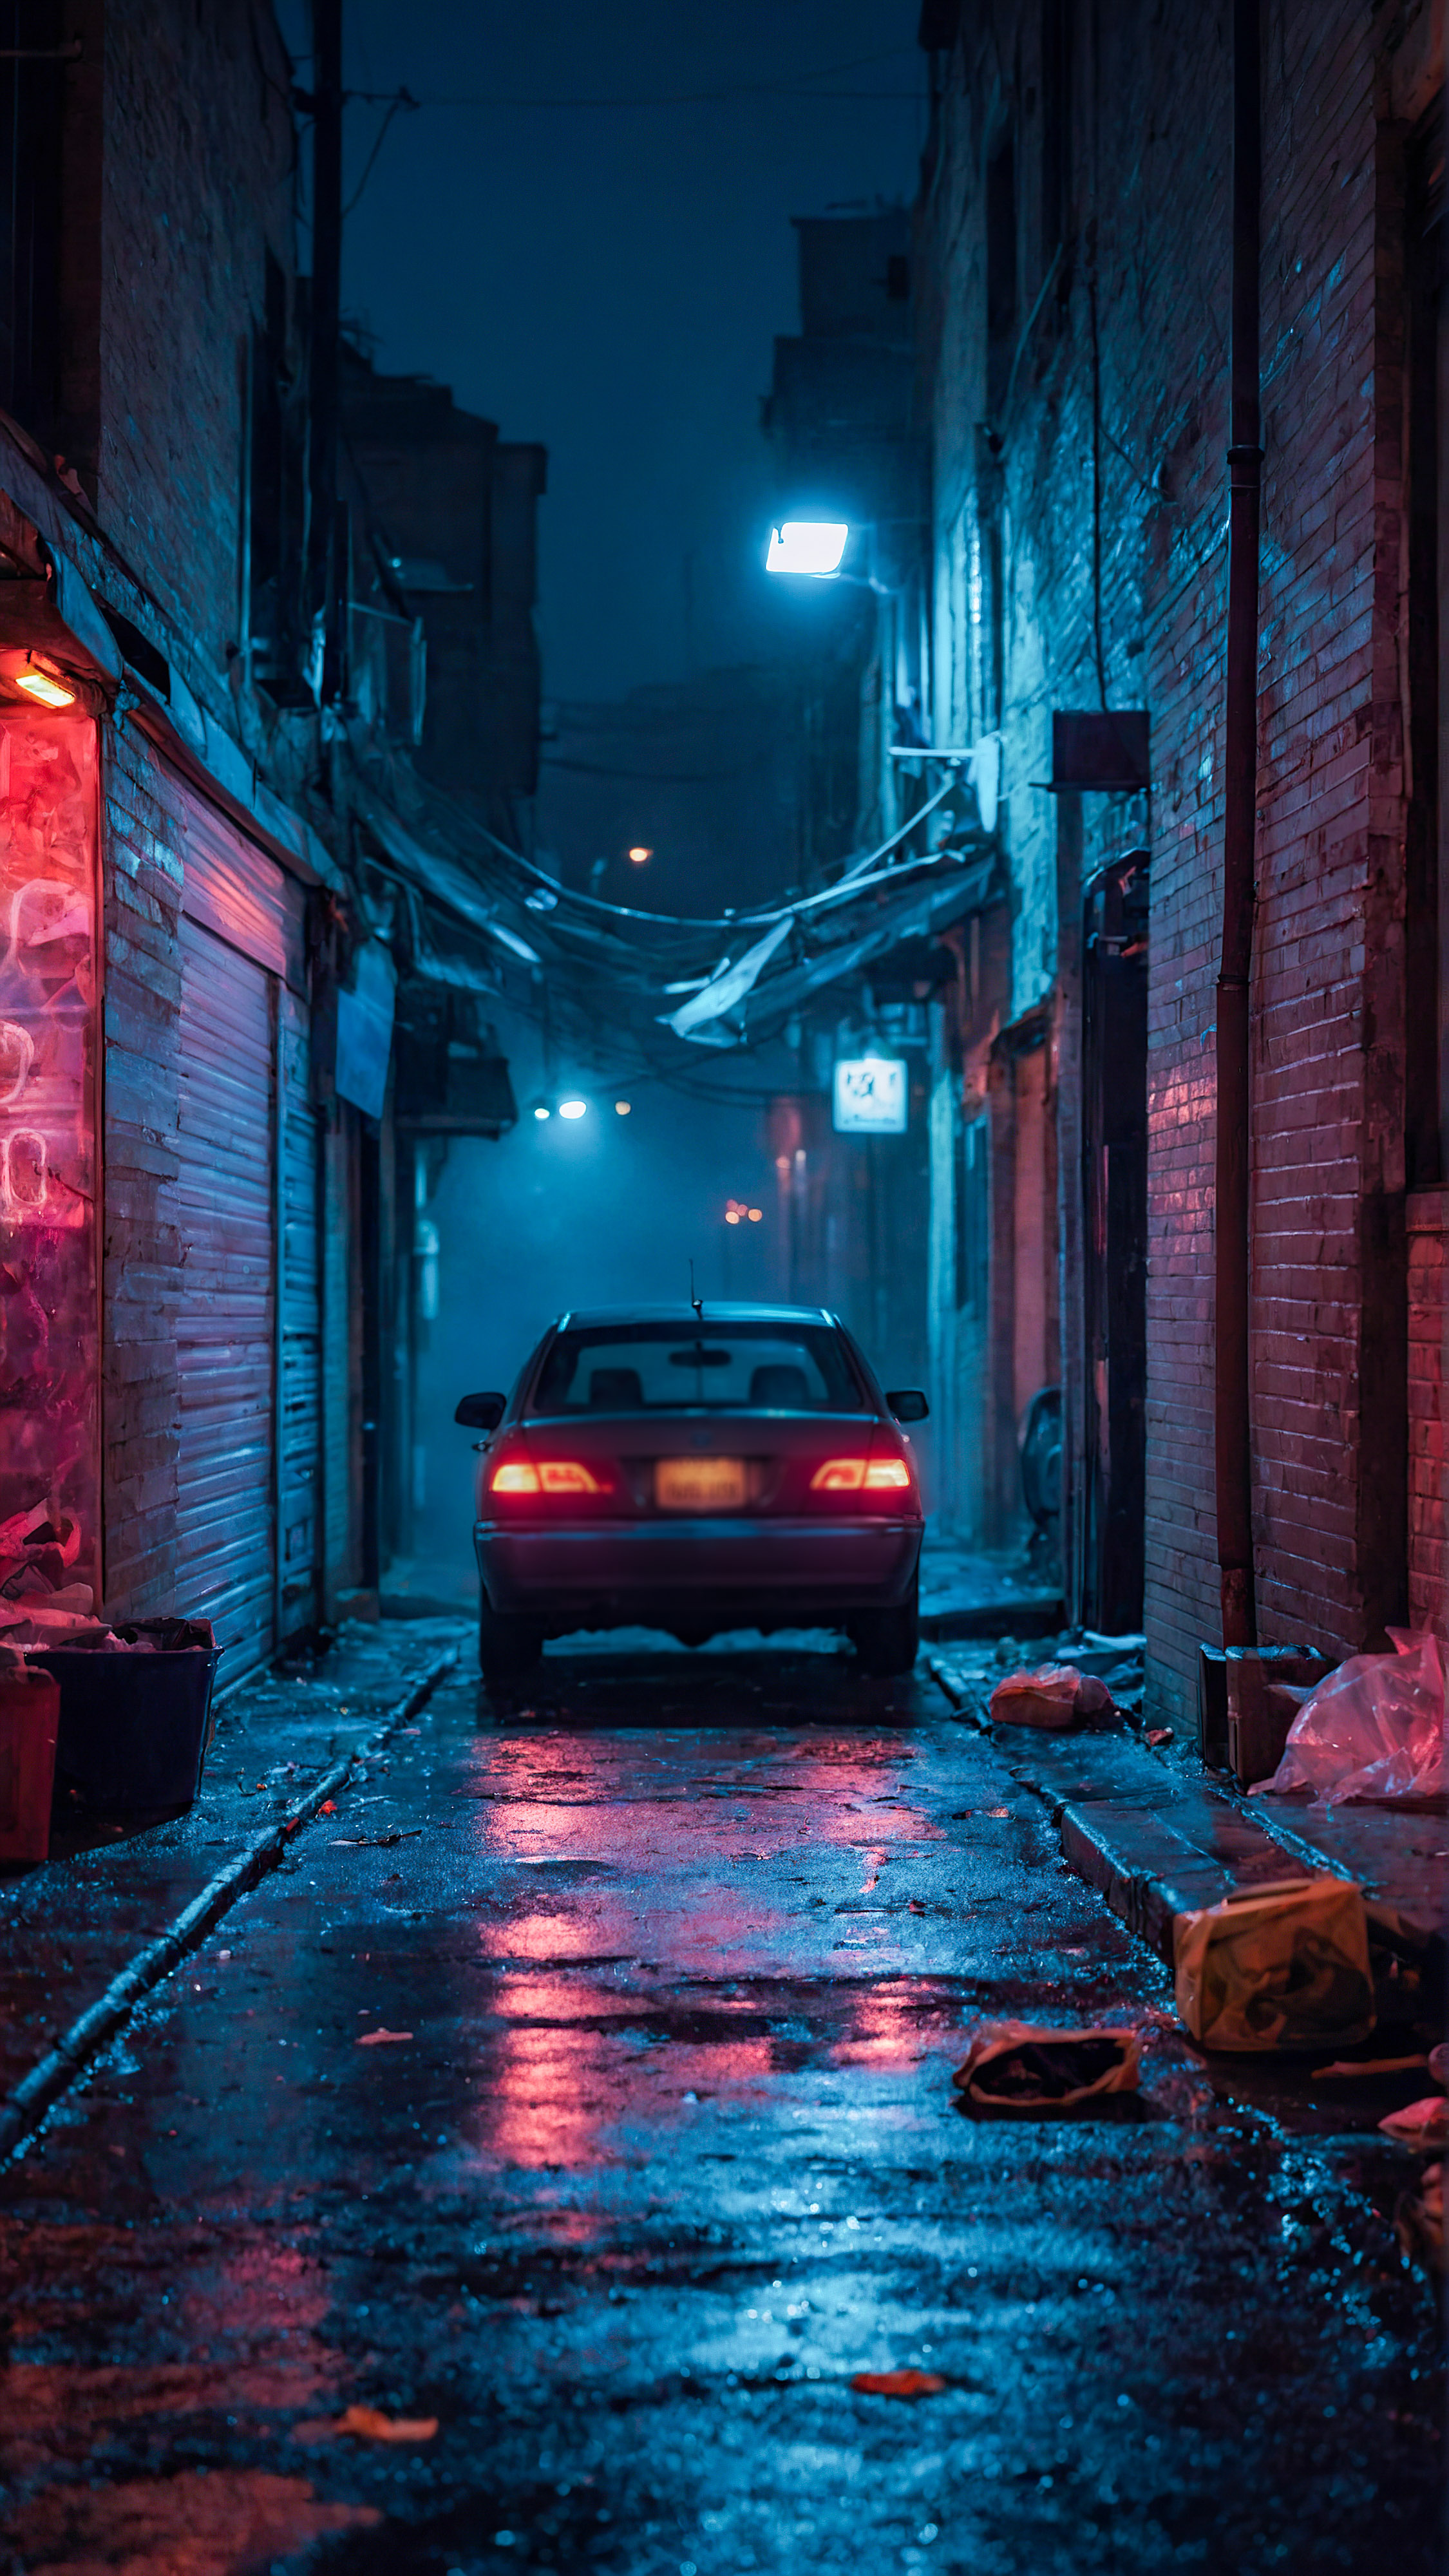 Capture the essence of the night with our best iOS wallpaper, a dimly lit, foggy alley at night, illuminated by neon signs, with a car parked amidst scattered trash.